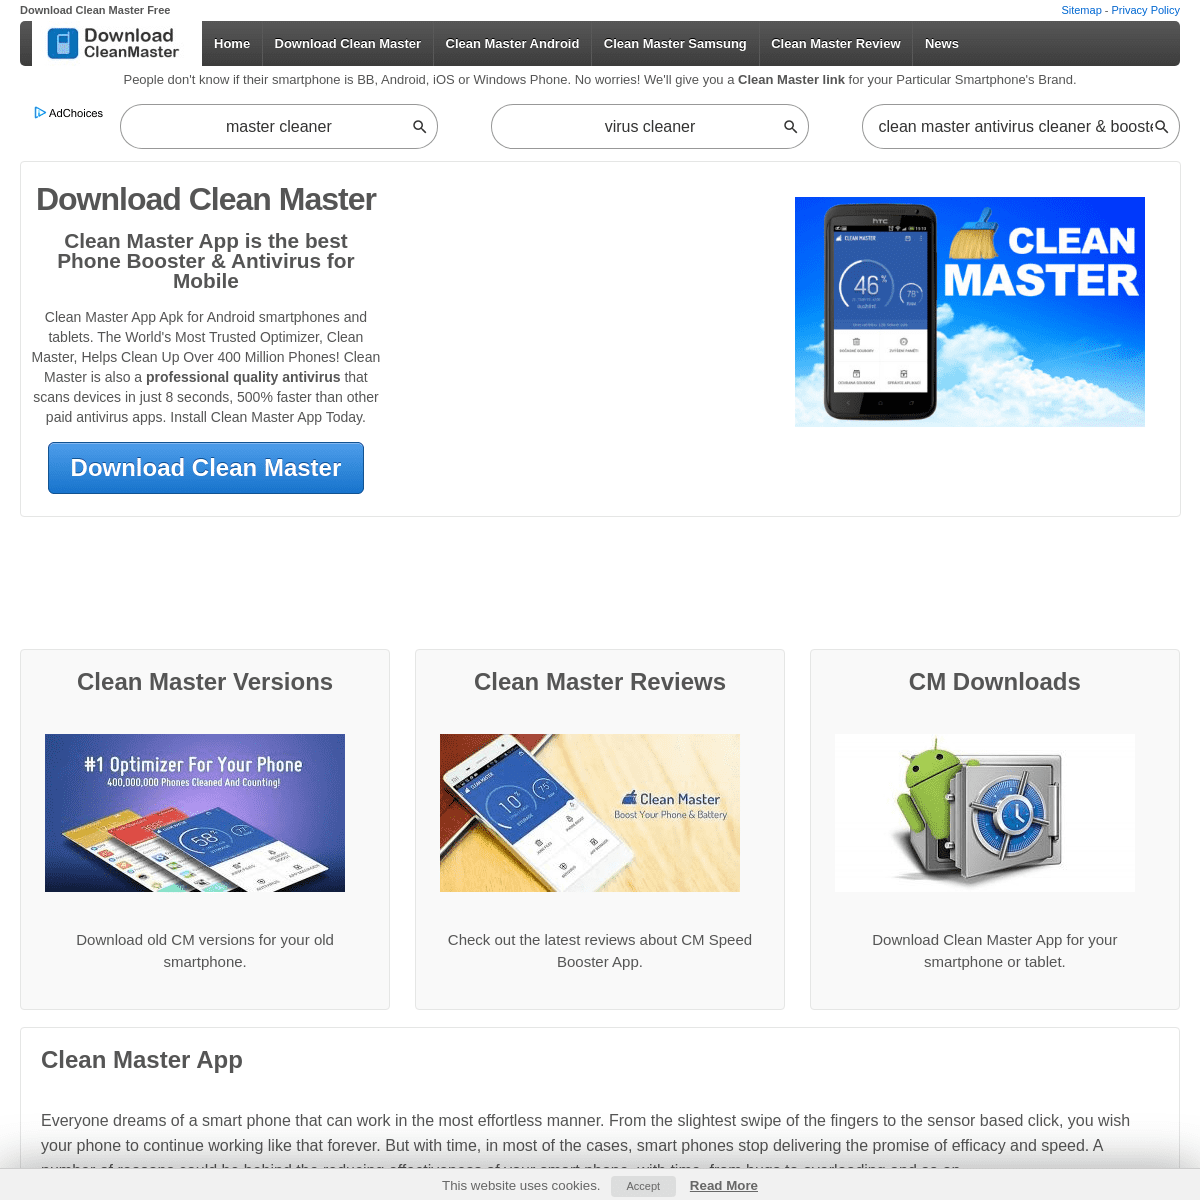 A complete backup of downloadcleanmaster.com